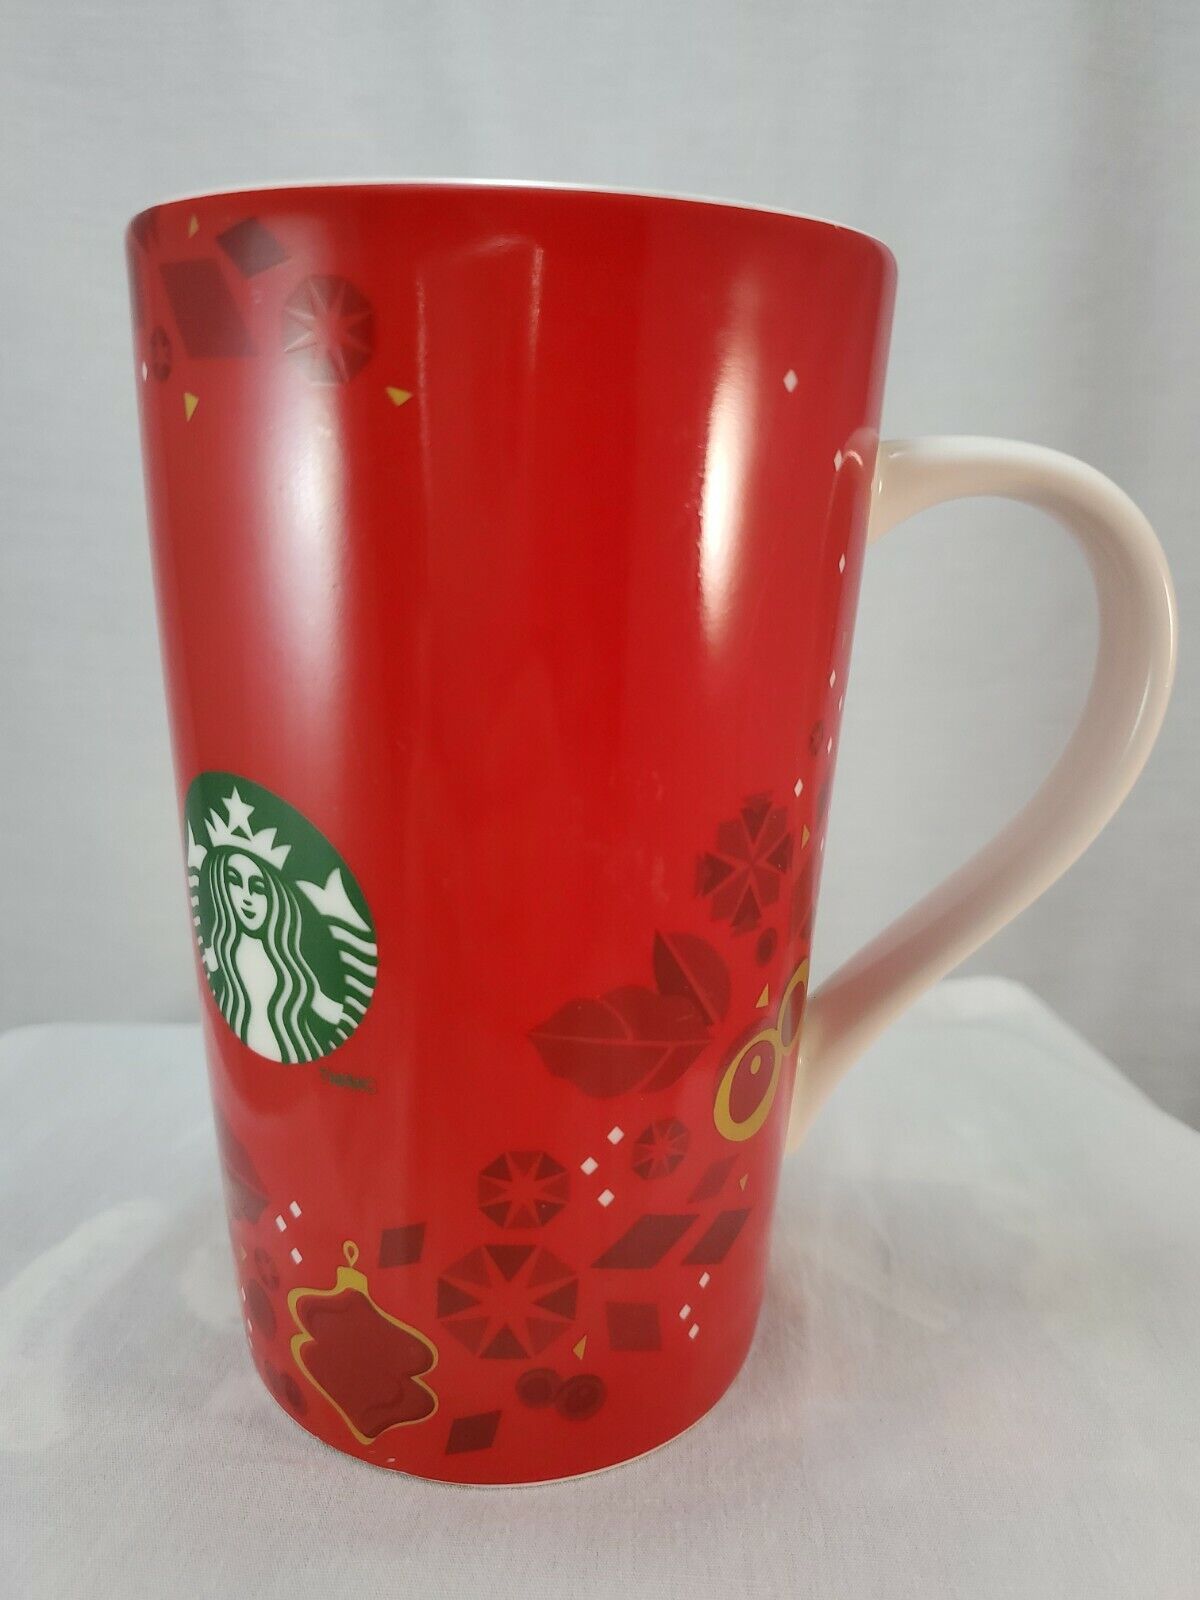 Starbucks 2013 Red Holiday Mug Cup With Green Siren - 16oz